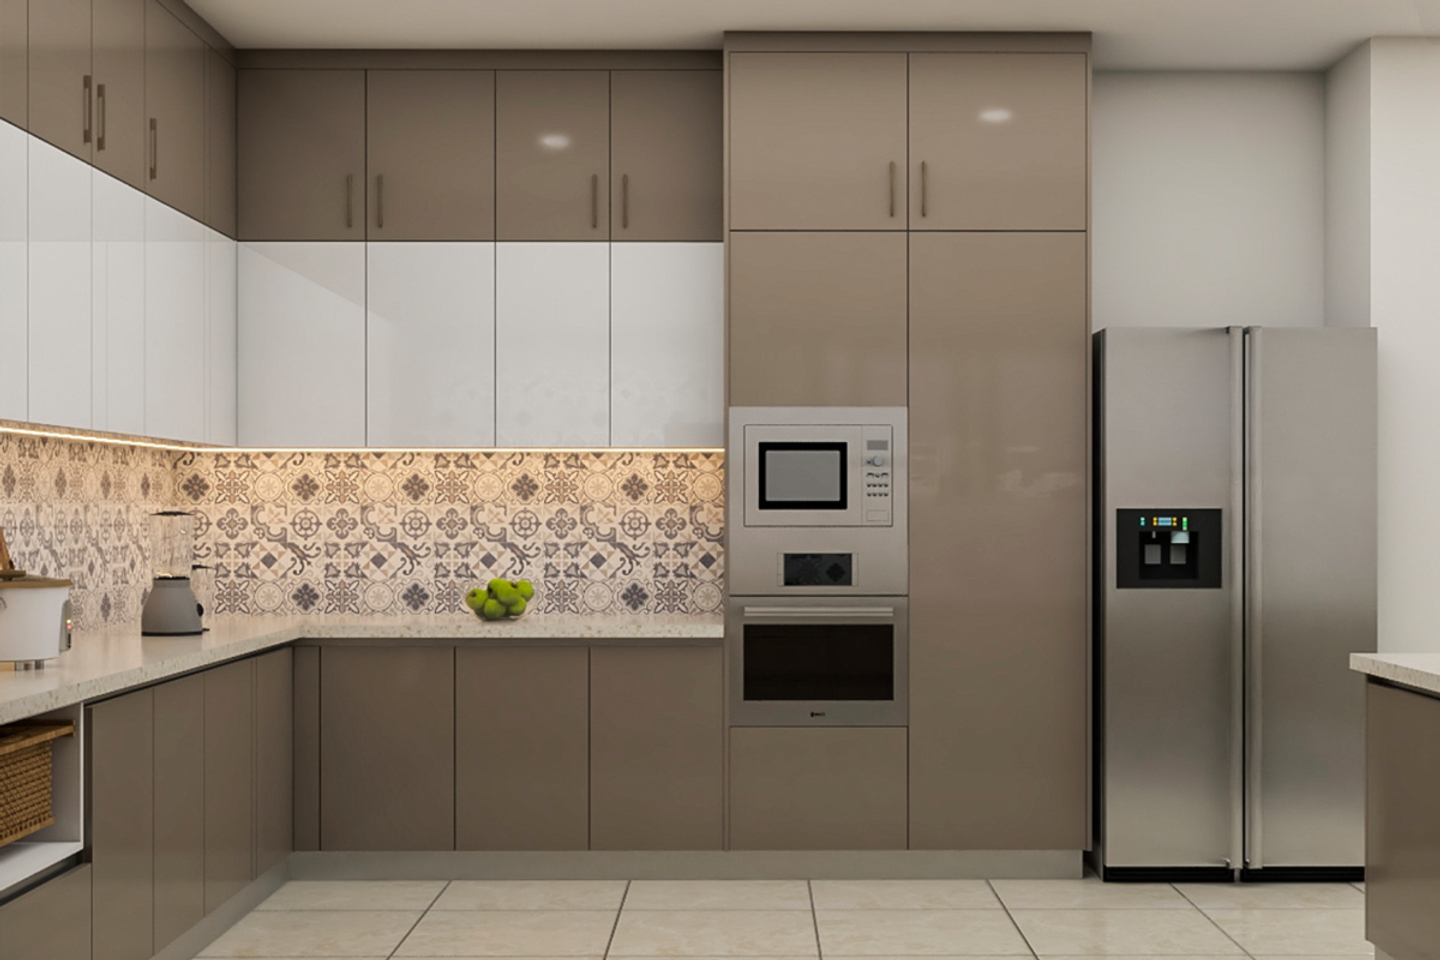 Modern Kitchen Interior Design With Floral Dado And Cove Lighting